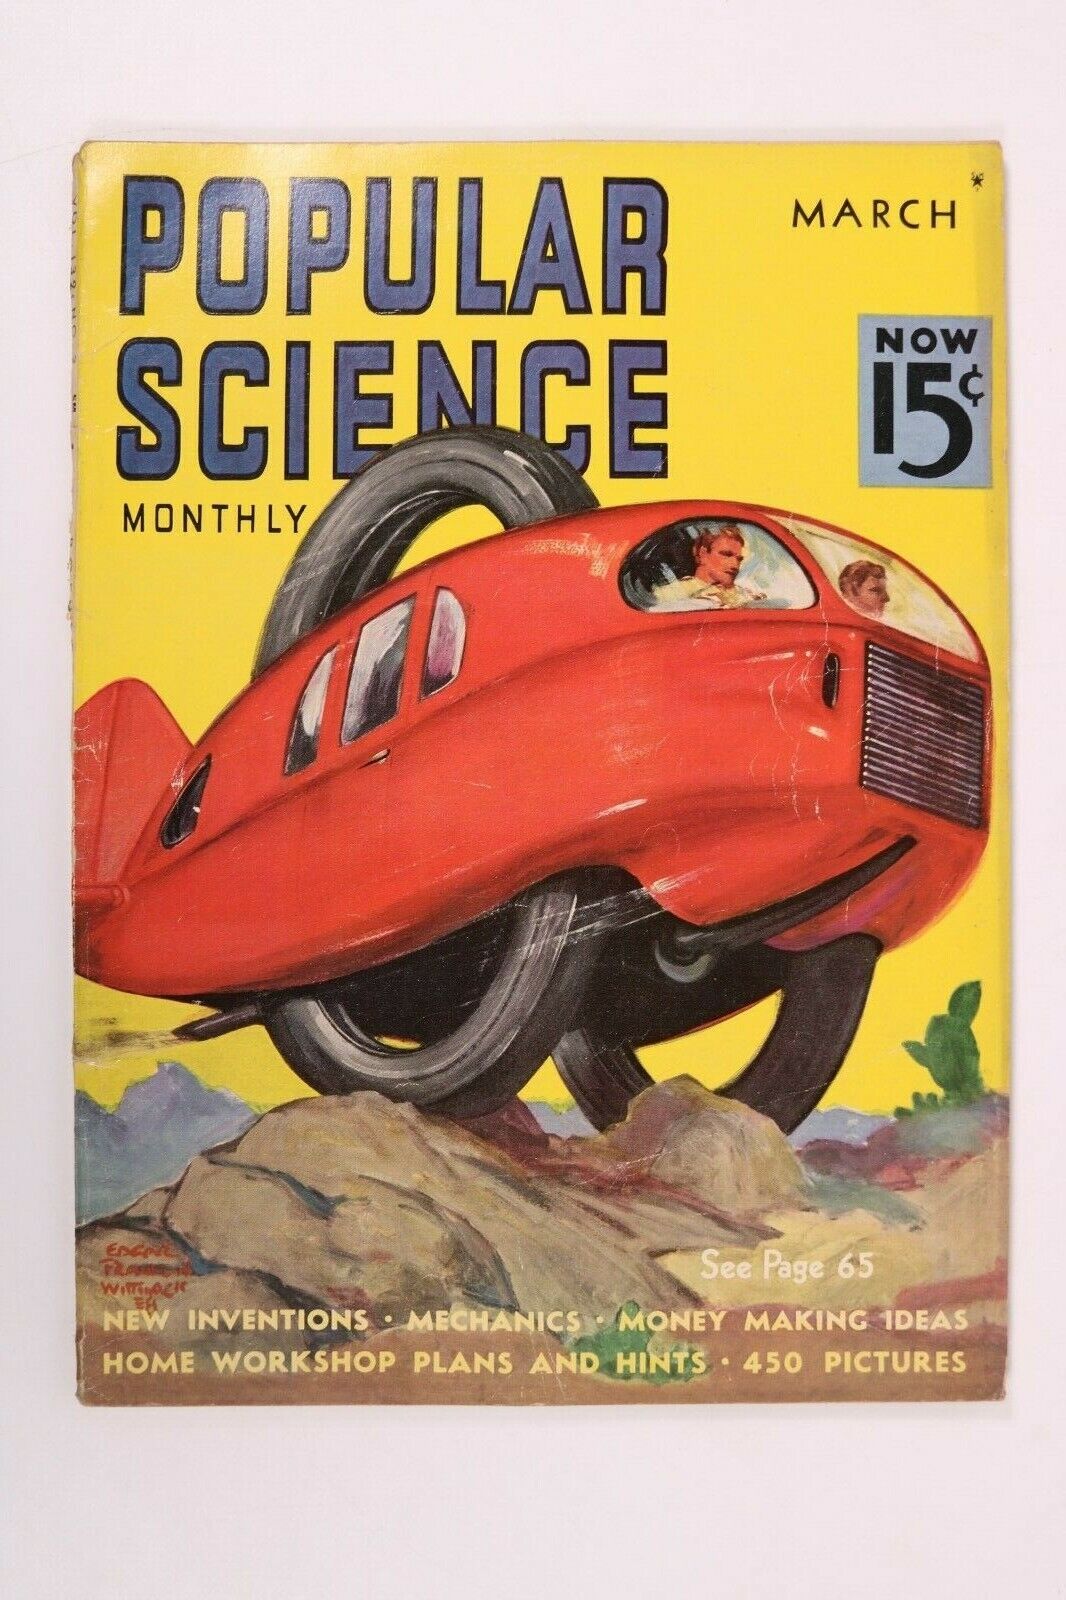 Vintage Popular Science Magazine March 1938 Get Rid of an Inferiority Complex